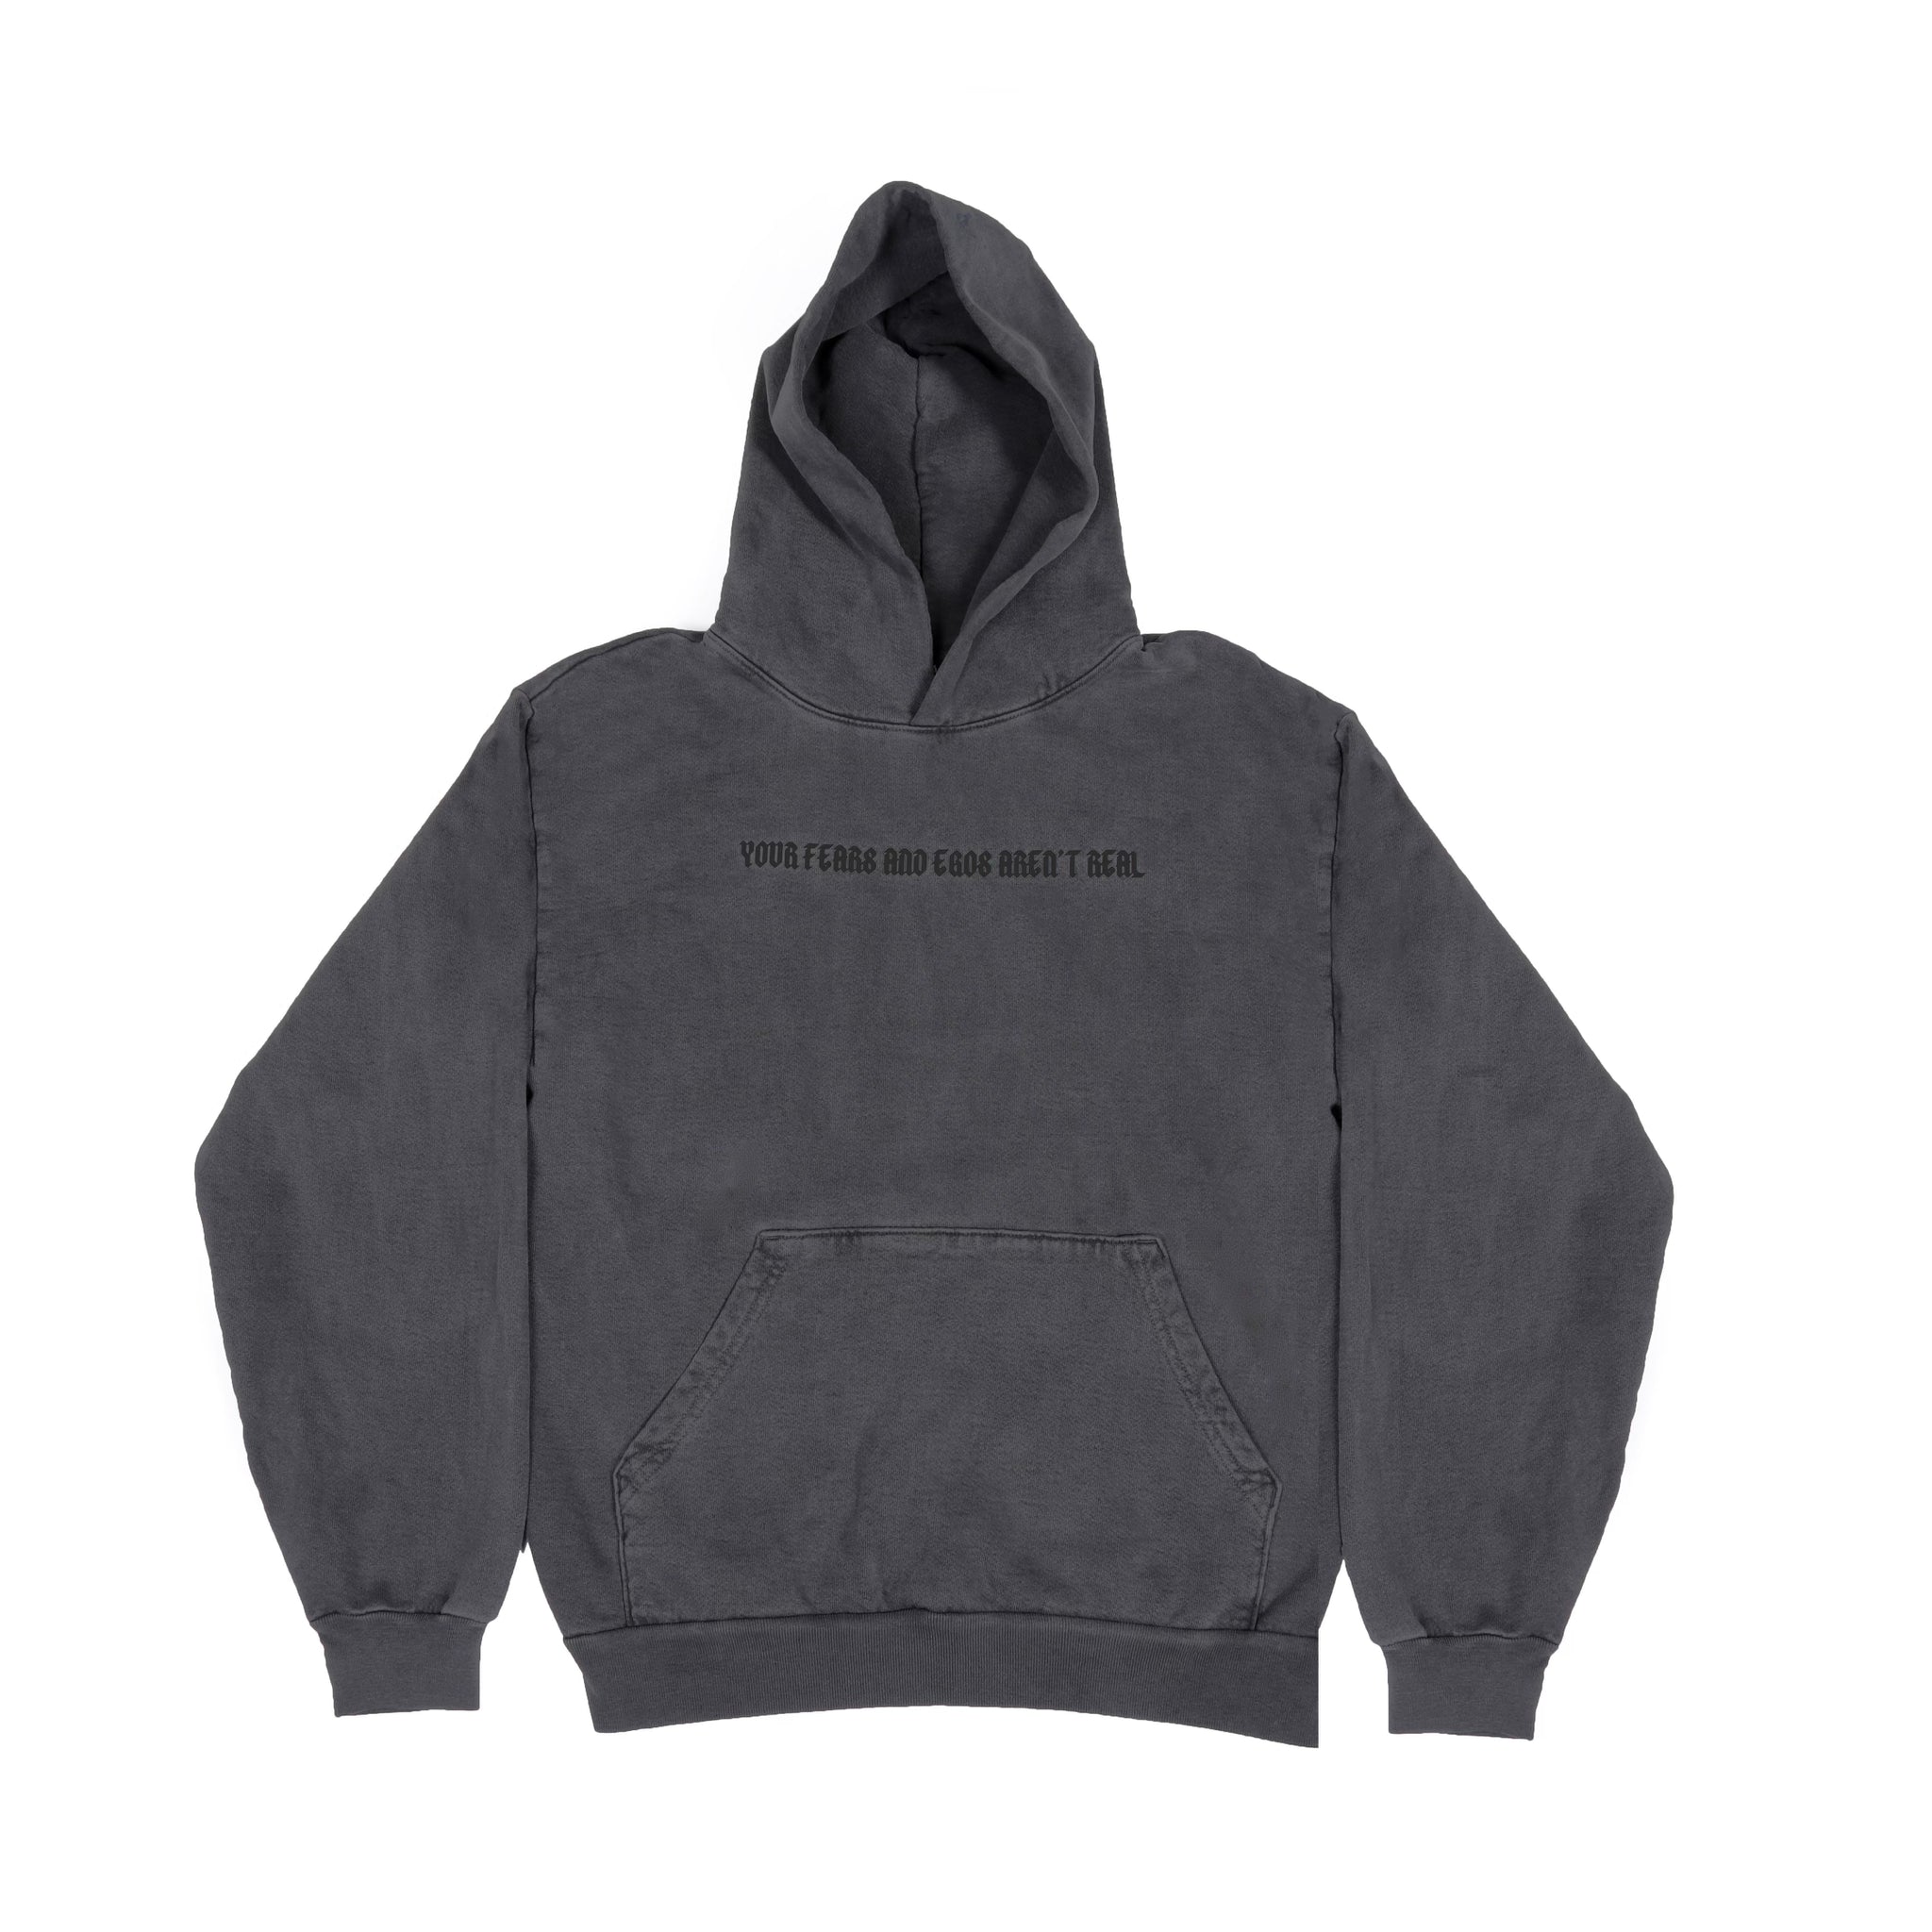 How Are You Attached Hoodie Dark Gray